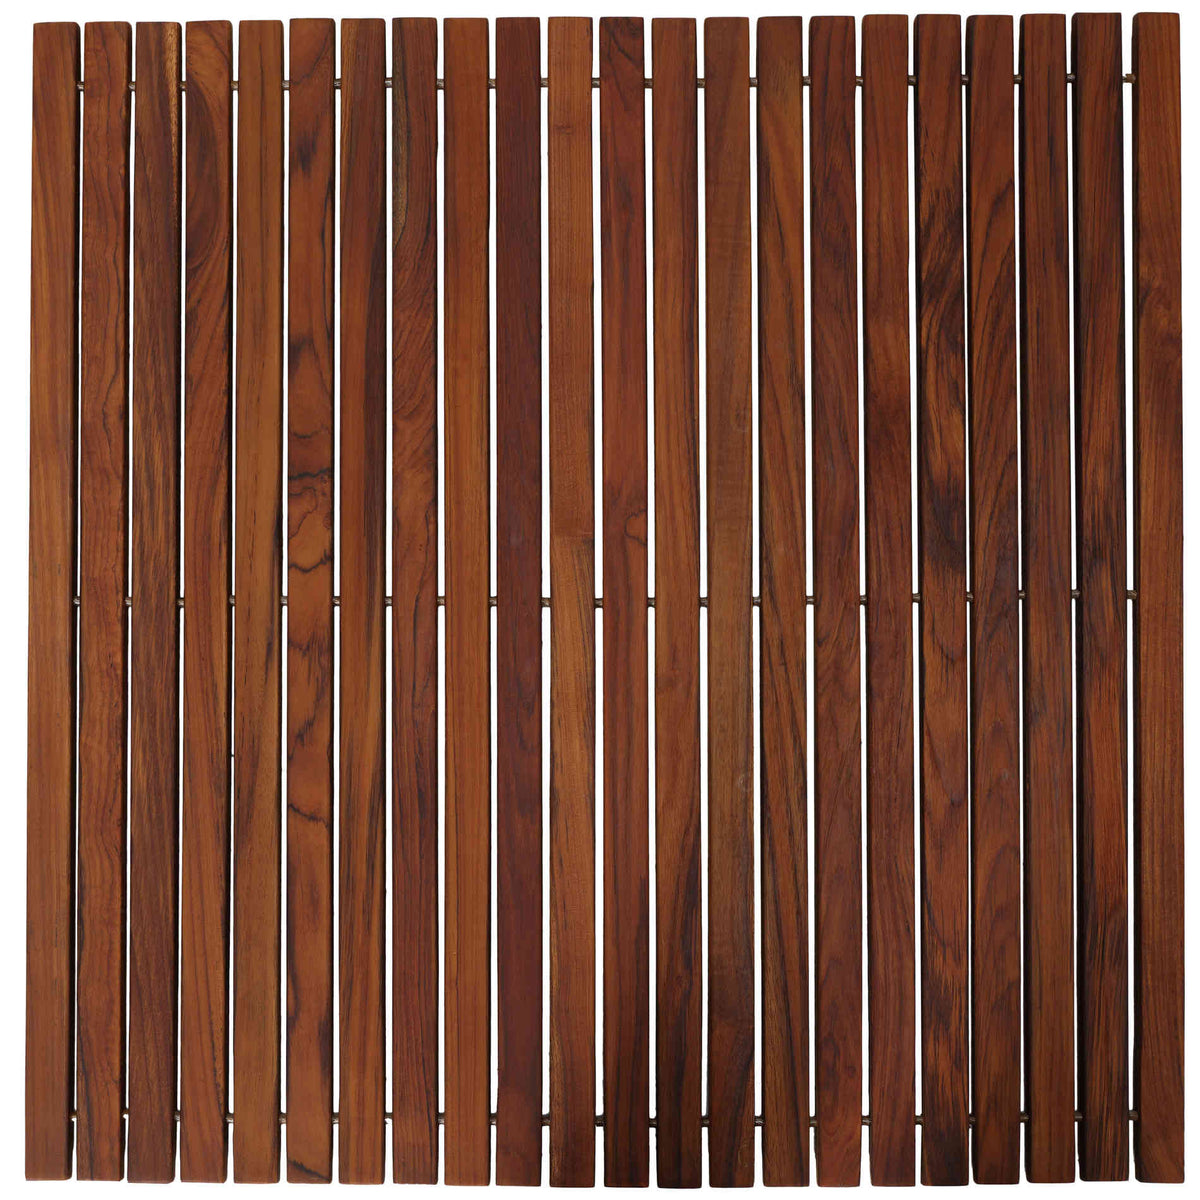 Bare Decor Fuji String Spa Shower Mat in Solid Teak Wood Oiled Finish. XL Square 30&quot; x 30&quot;